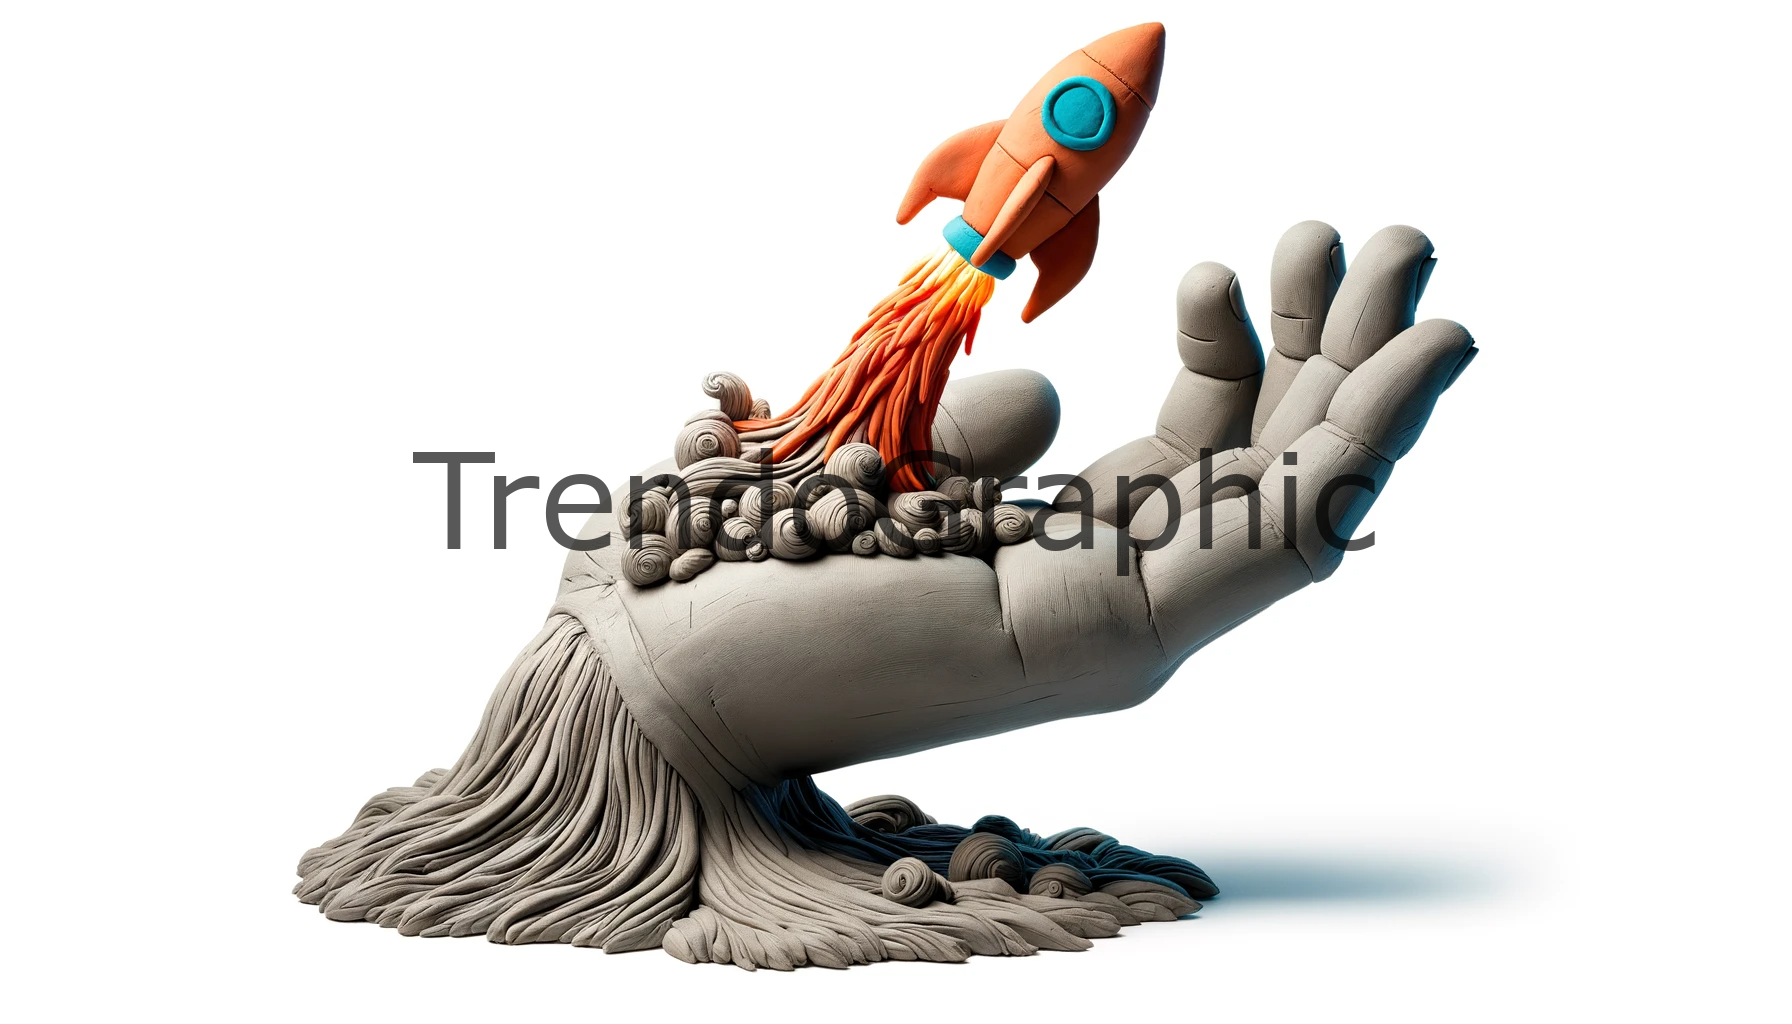 Aspirations in Clay: Hand-Launching Rocket Illustration”